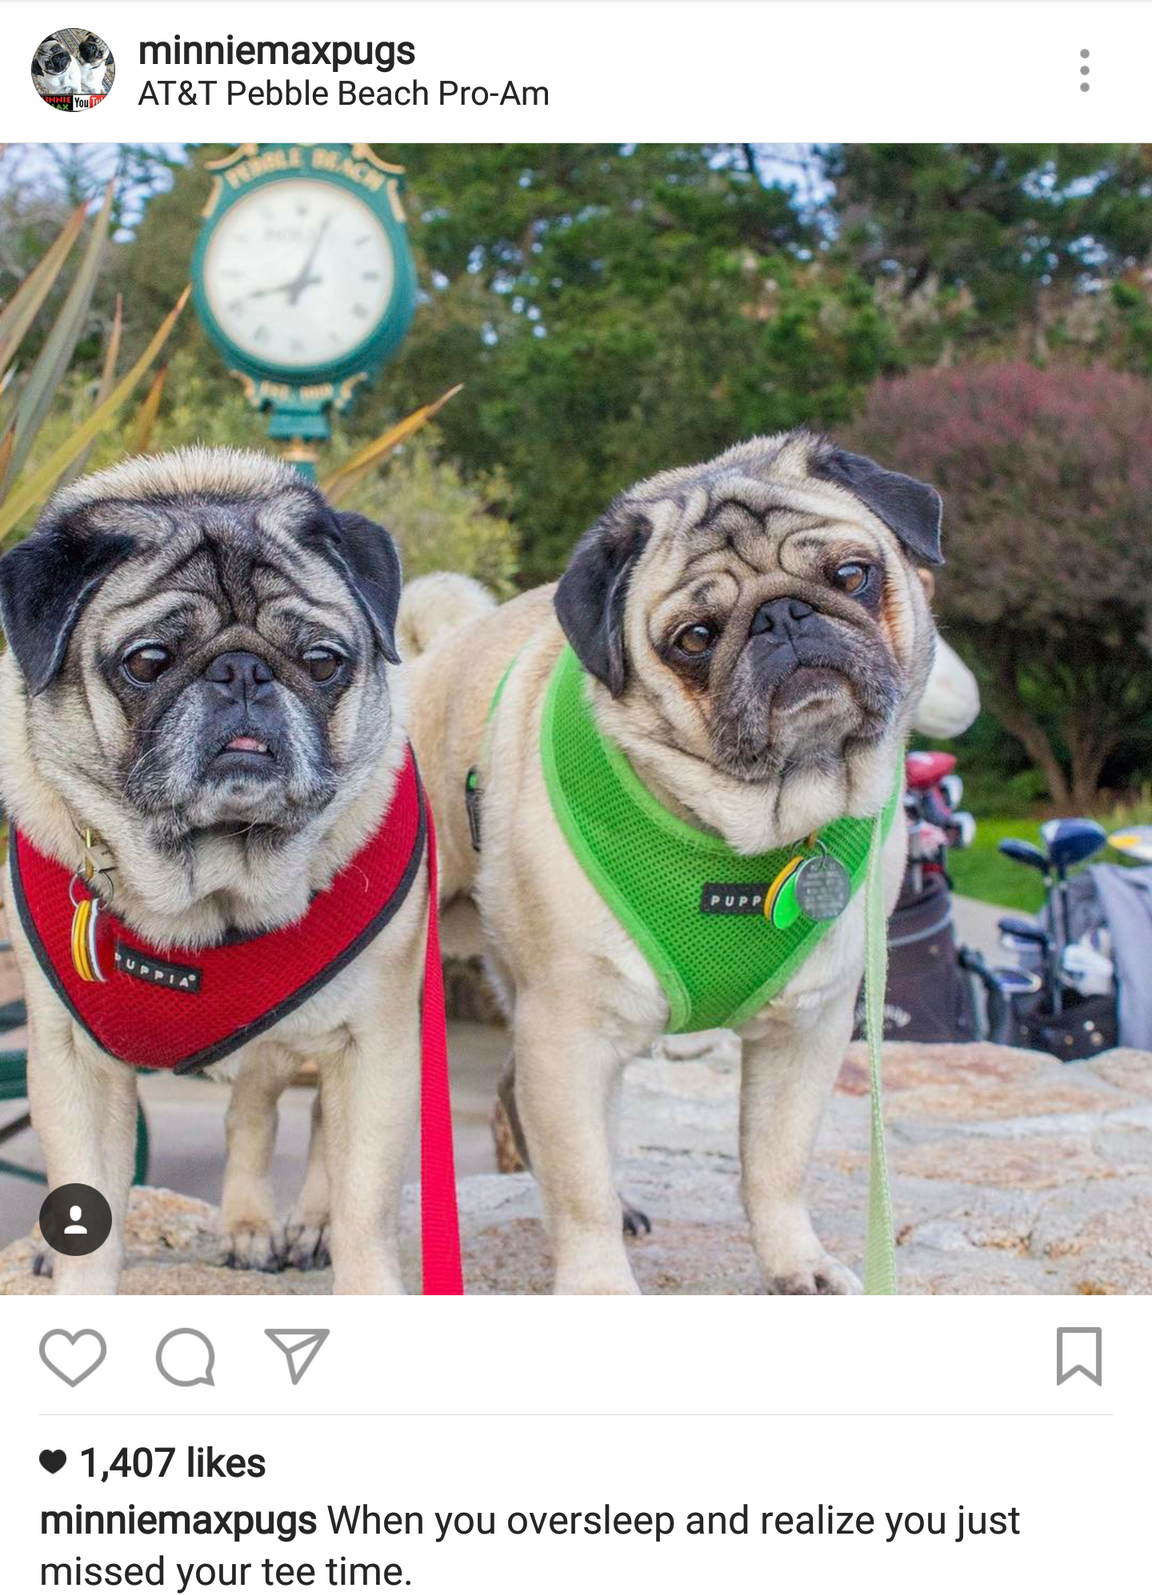 @minniemaxpugs has about 106k followers and is just what the doctor ordered for a little extra happiness in your life (and that order is a double shot of twin pug cuteness!) They've even been on Good Morning America, The Tonight Show, Animal Planet, Ellen, Disney.com, YouTube!